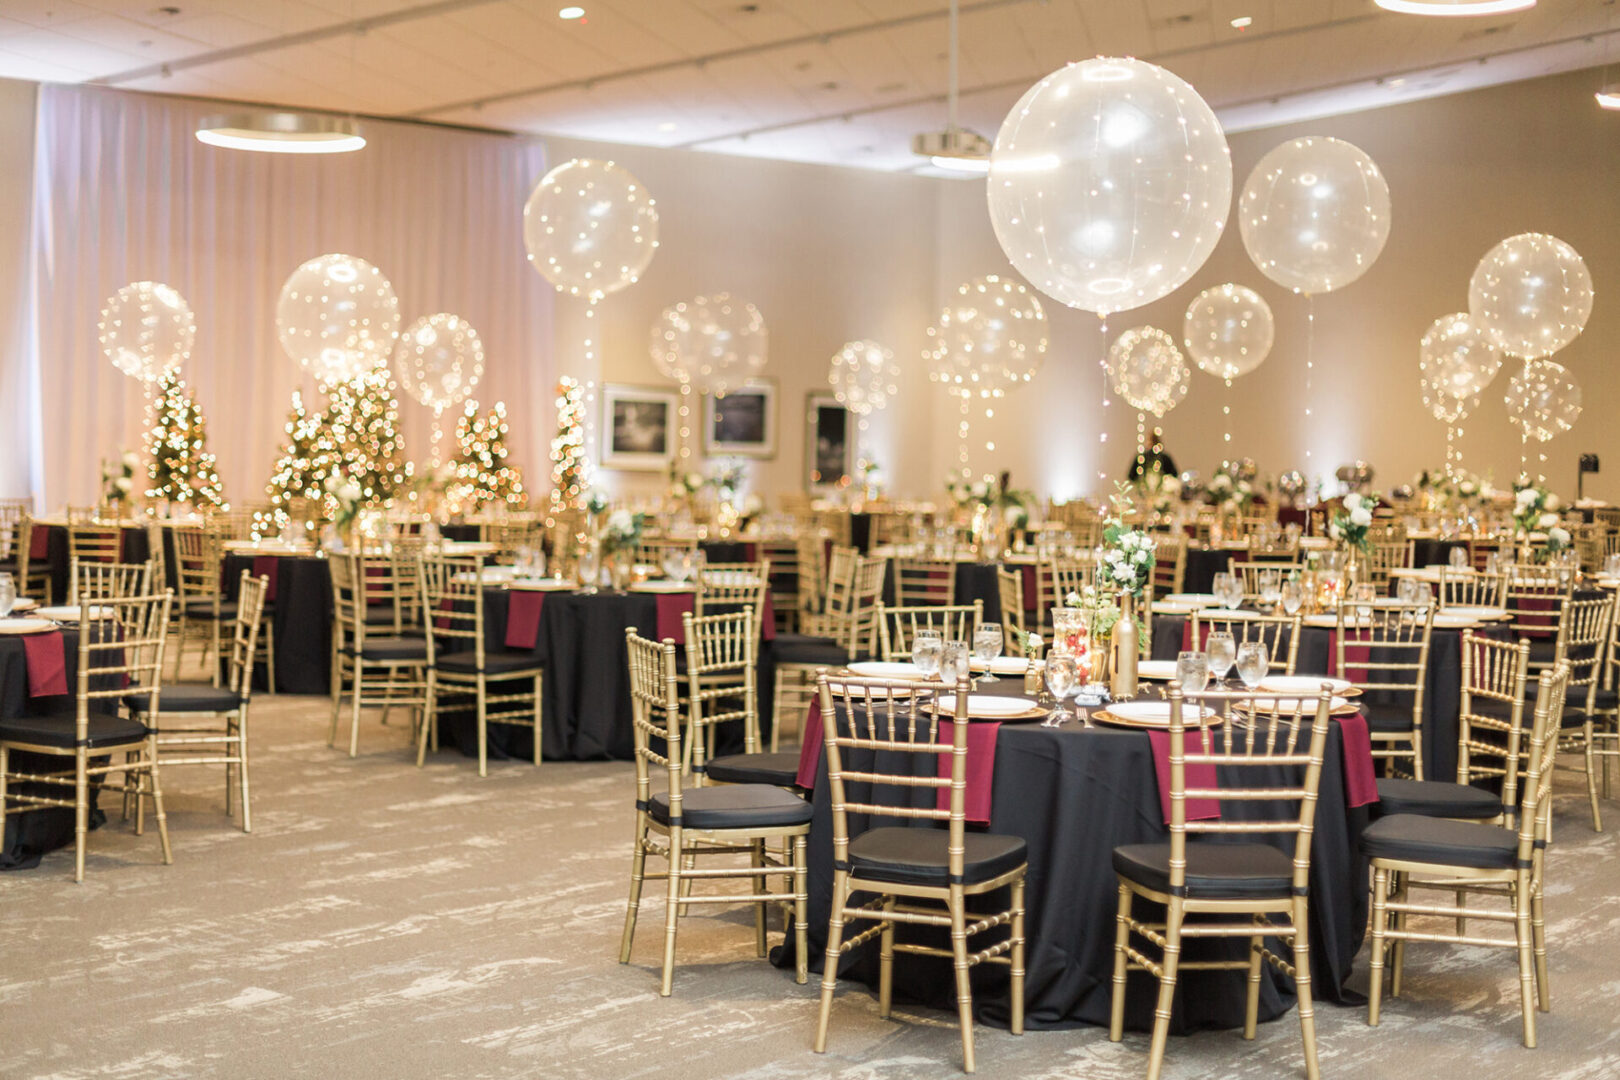 A banquet hall with tables and chairs, balloons hanging from the ceiling.